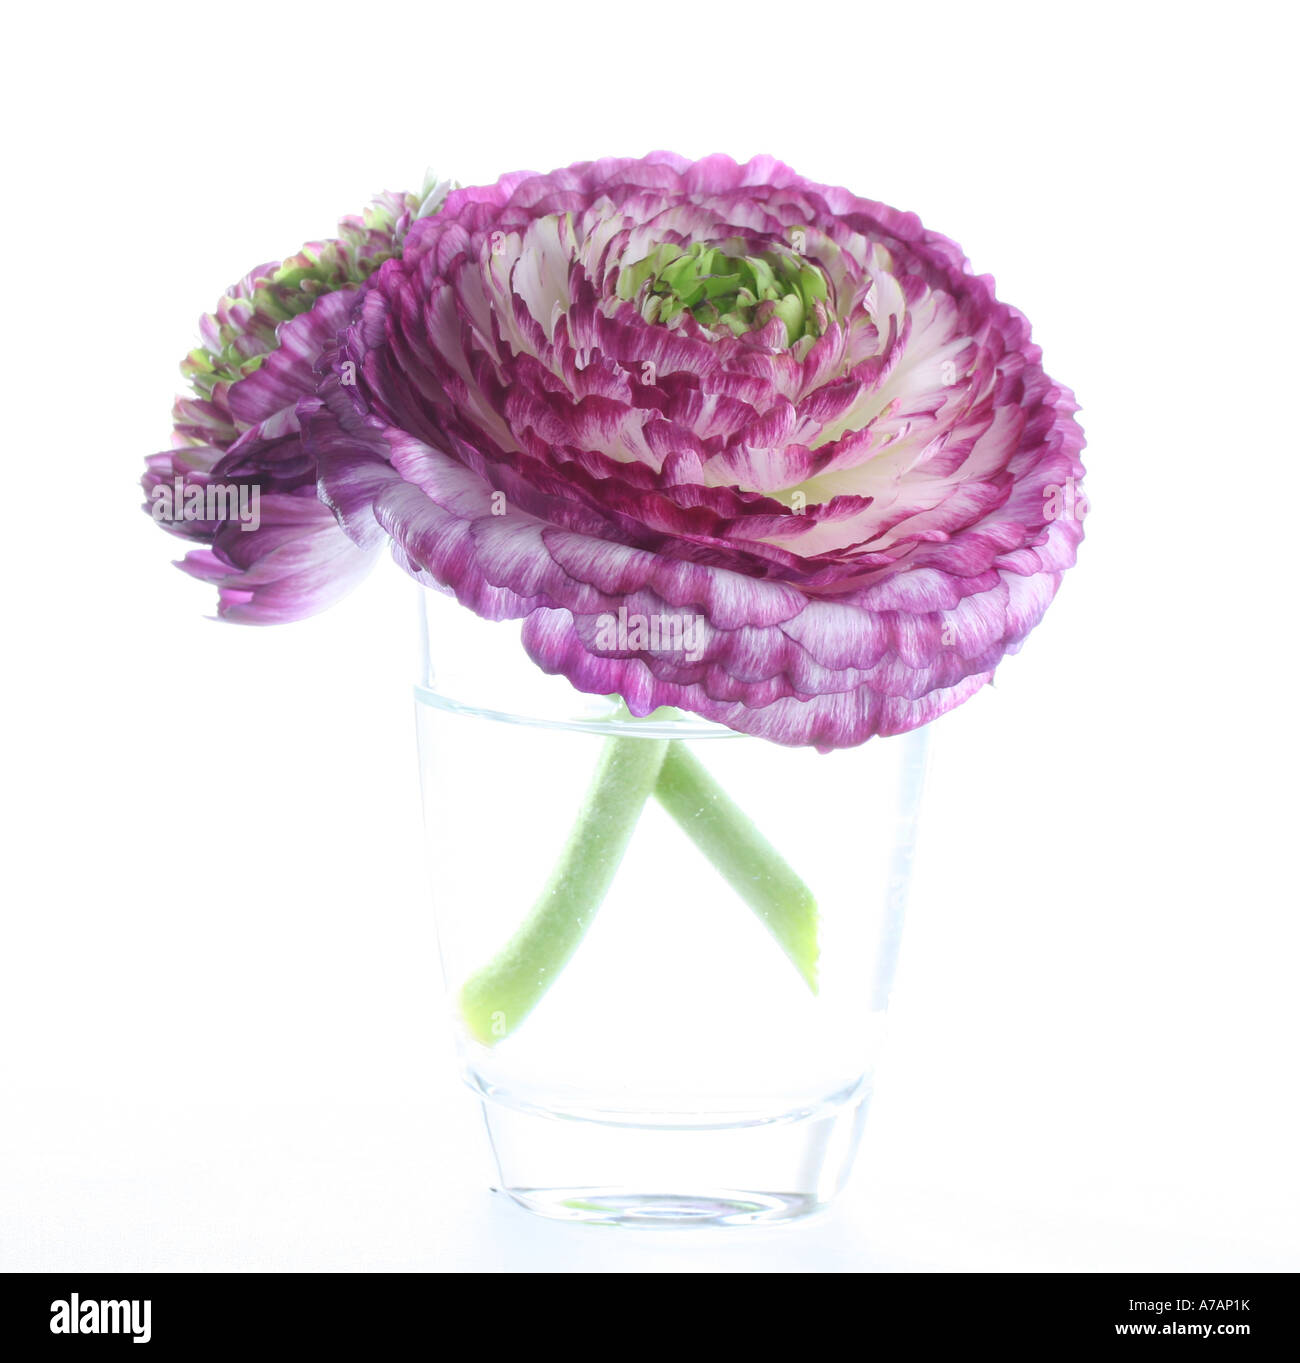 Two Ranunculus flower heads in a glass of water Stock Photo